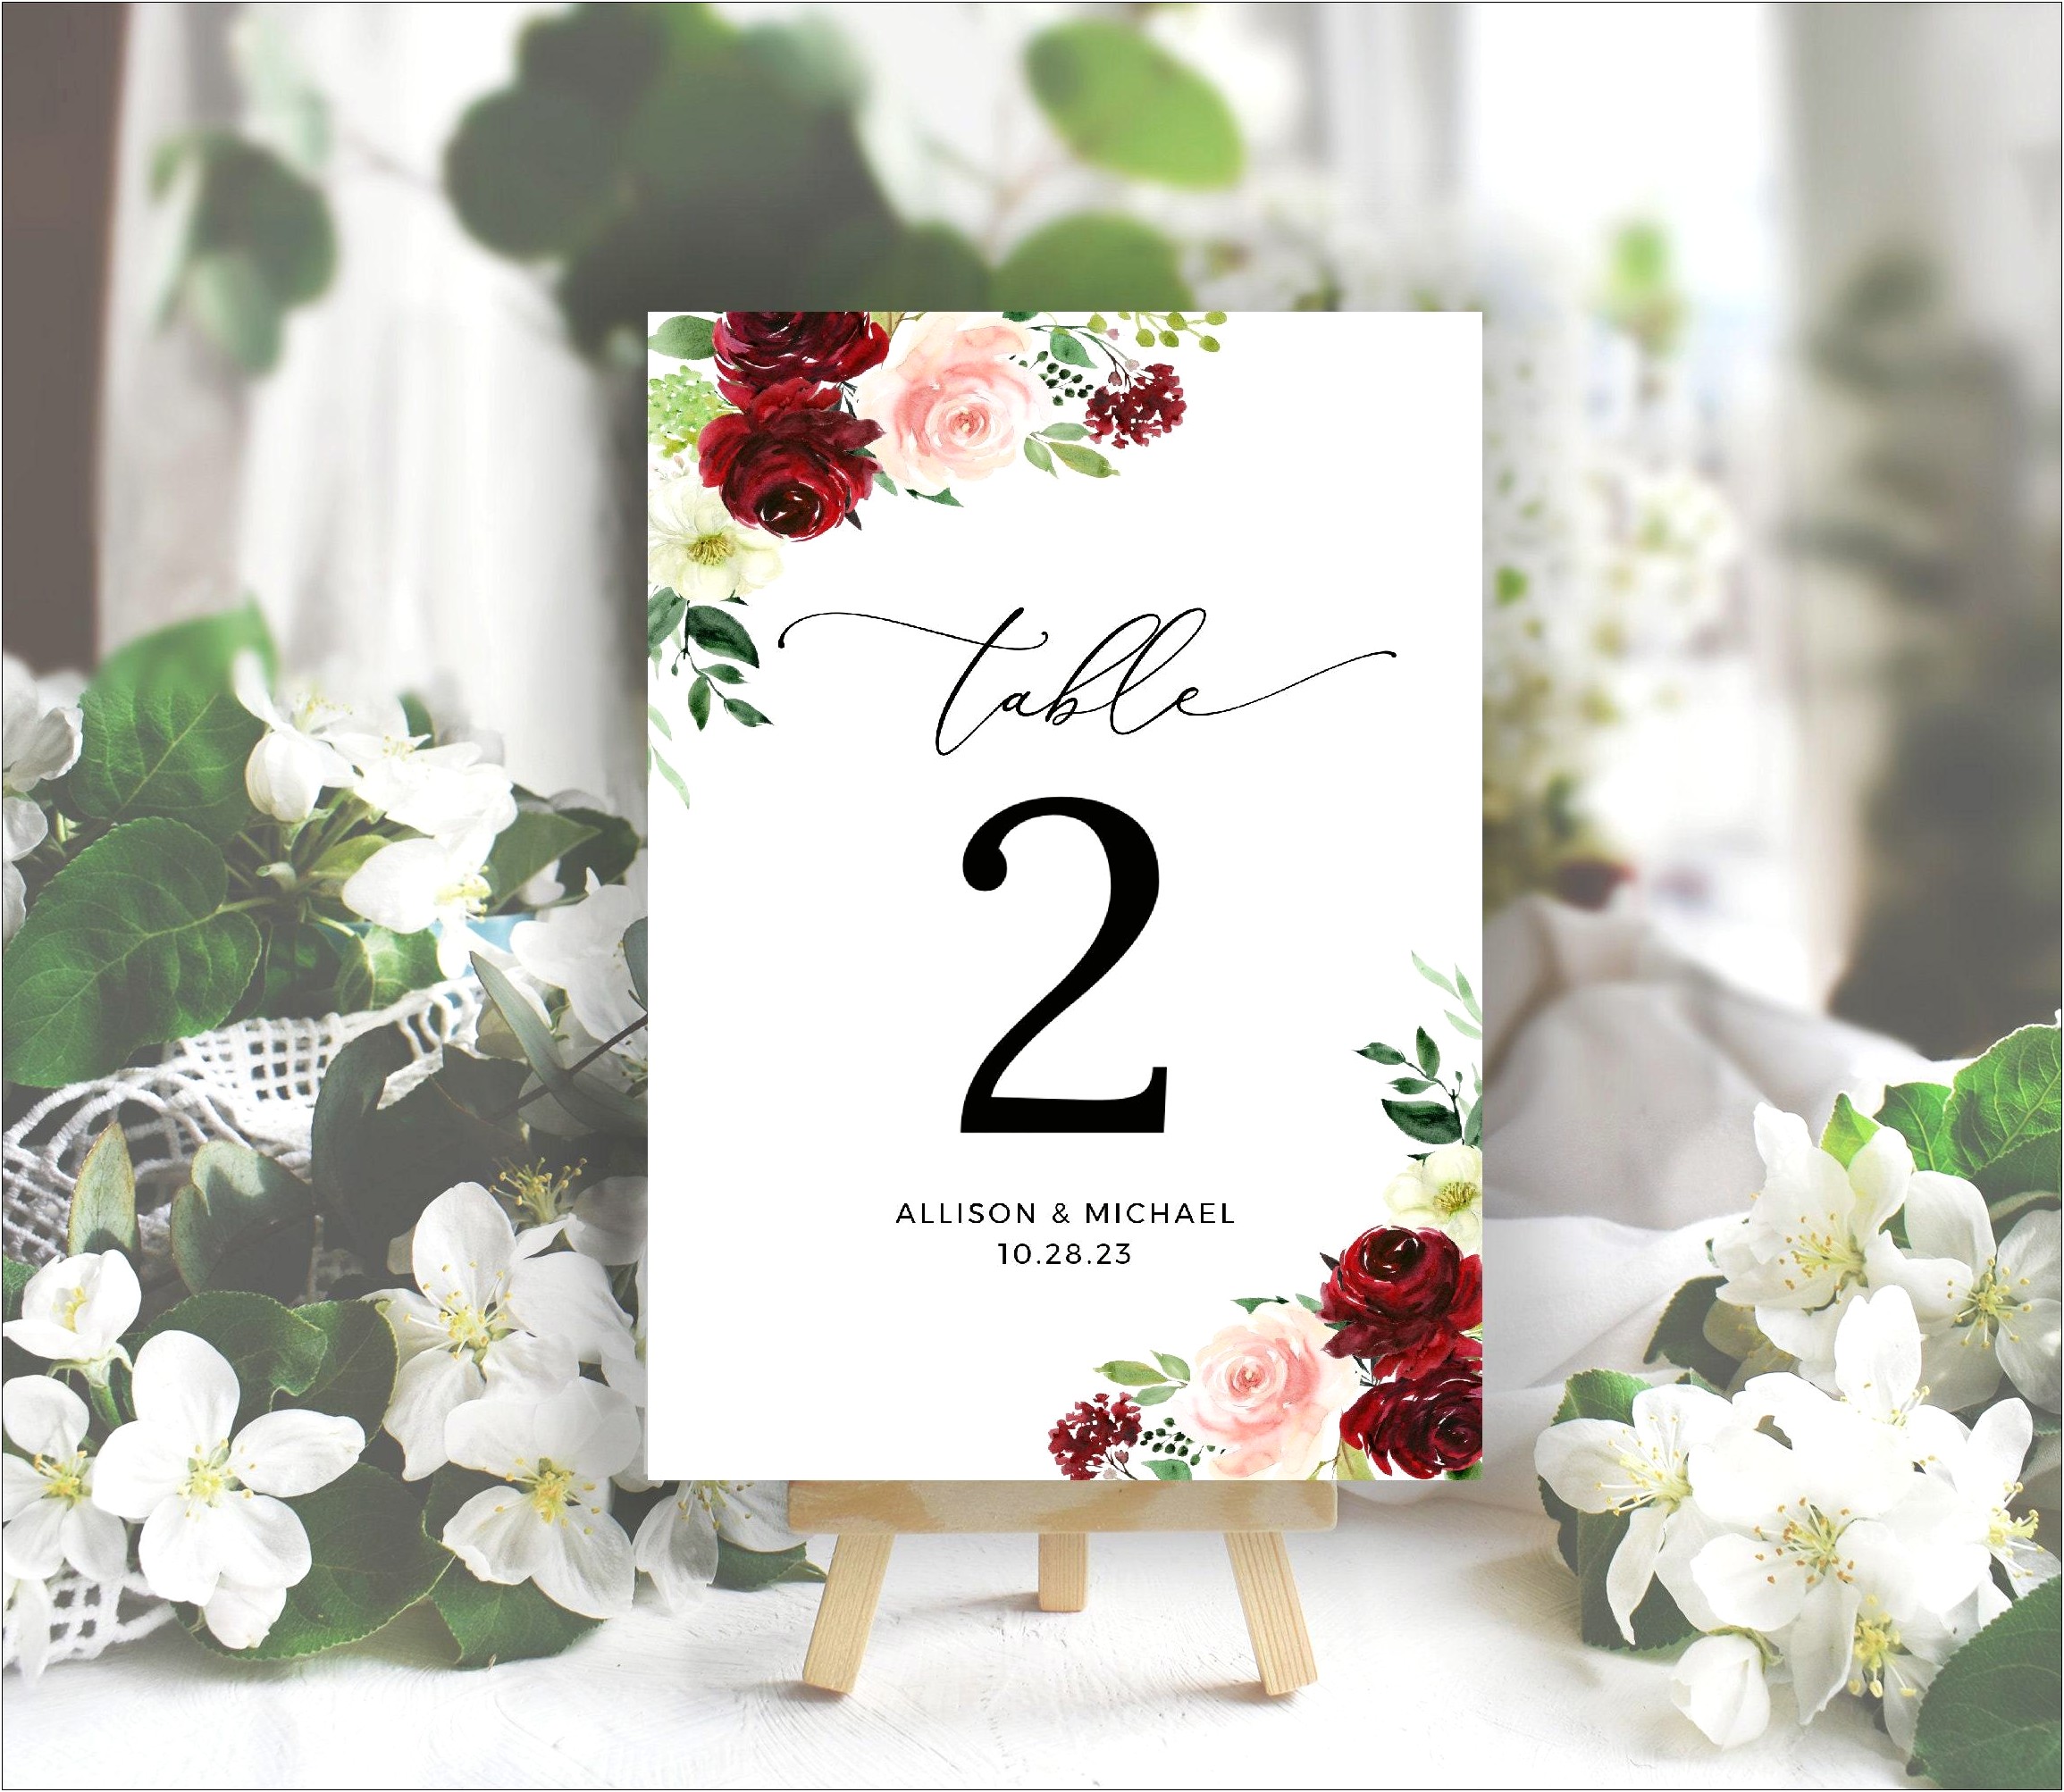 4x6 Wedding Table Number Templates Free